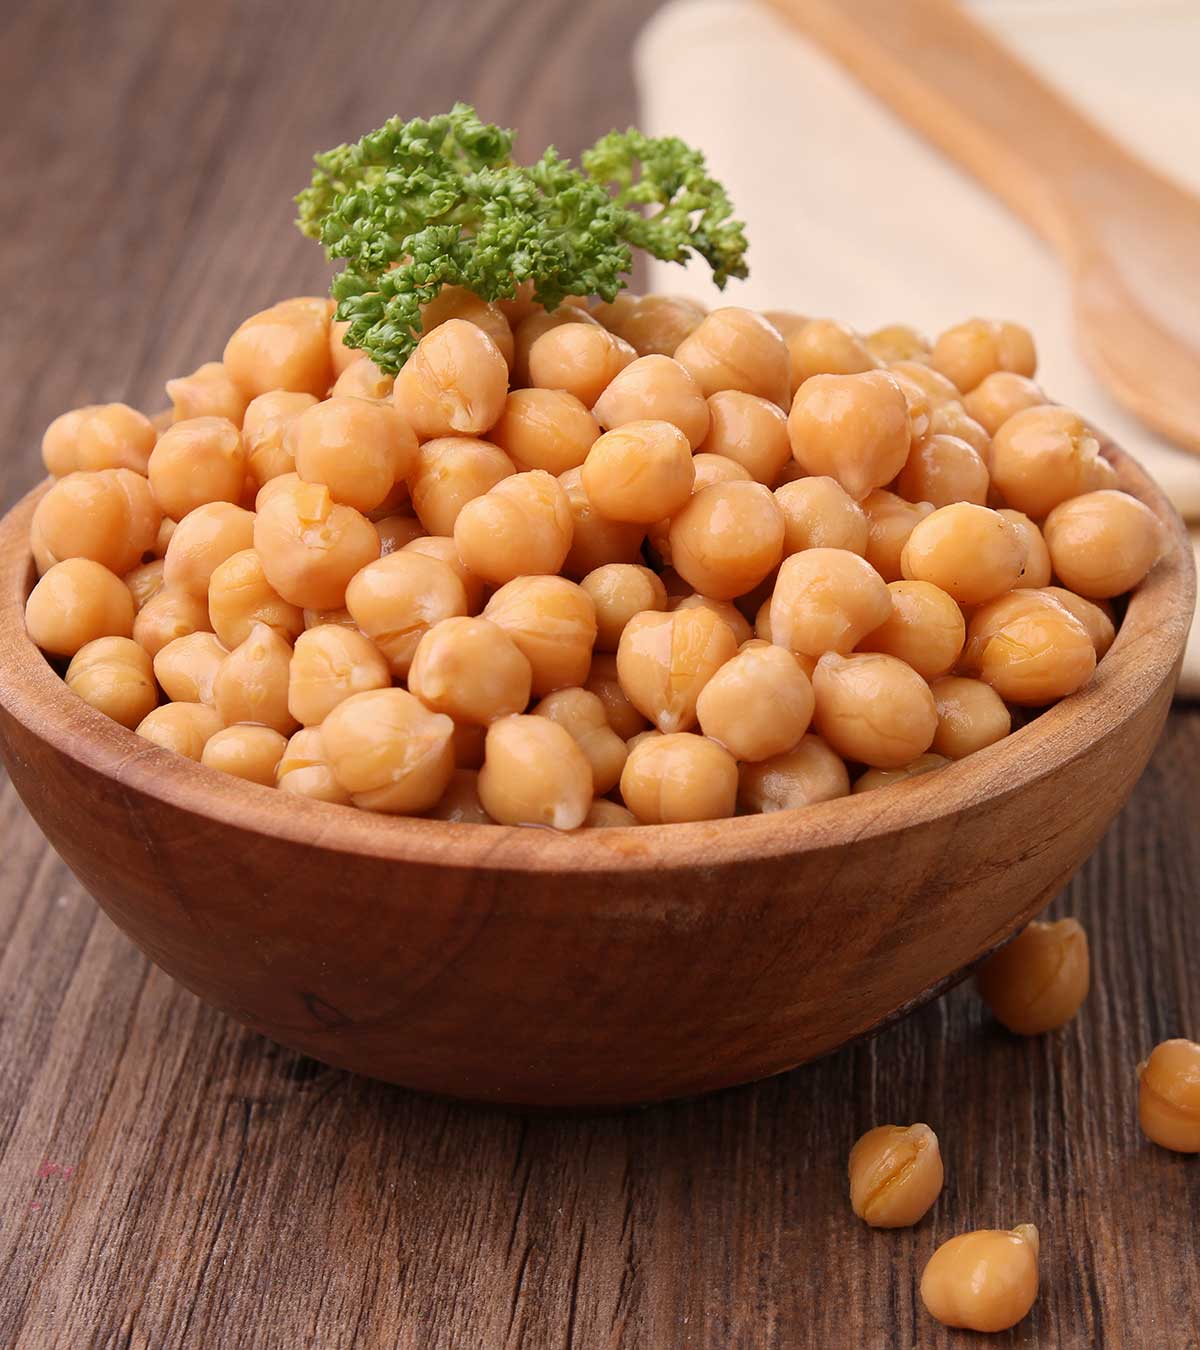 Chickpeas For Baby: Safety, Health Benefits, and Recipes